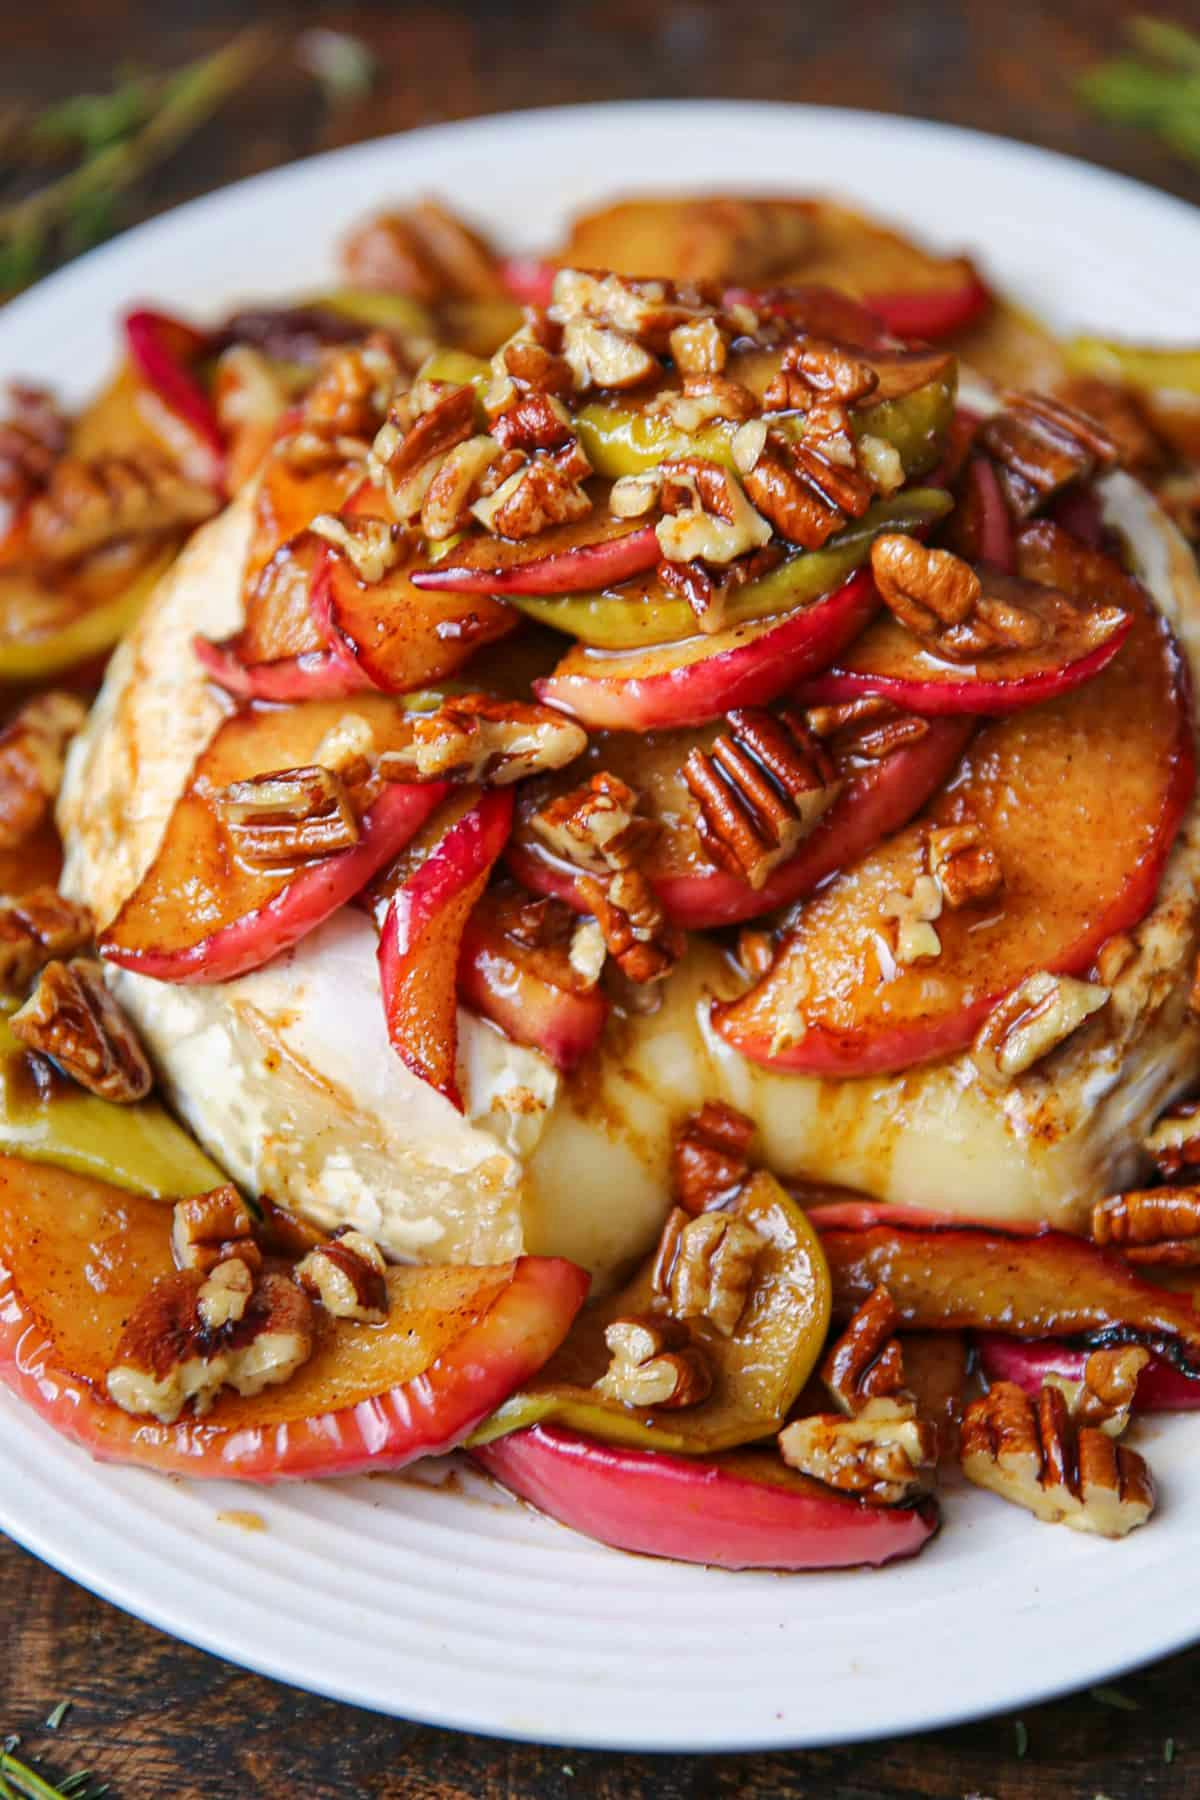 Baked Brie with Pecan and Apples